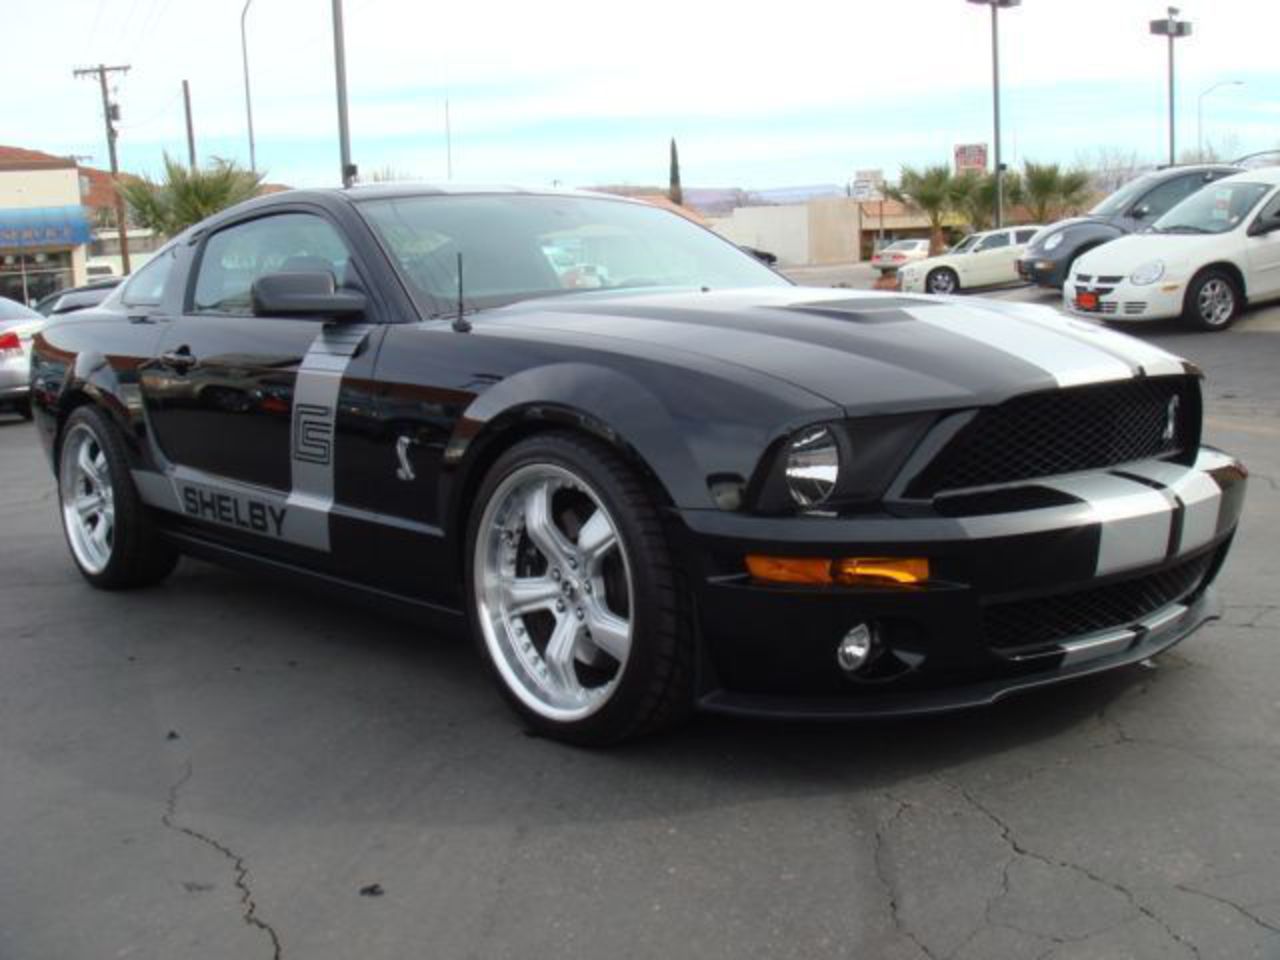 2007 Ford Mustang Shelby GT500 Coupe Pictures - 2007 Ford Mustang ...